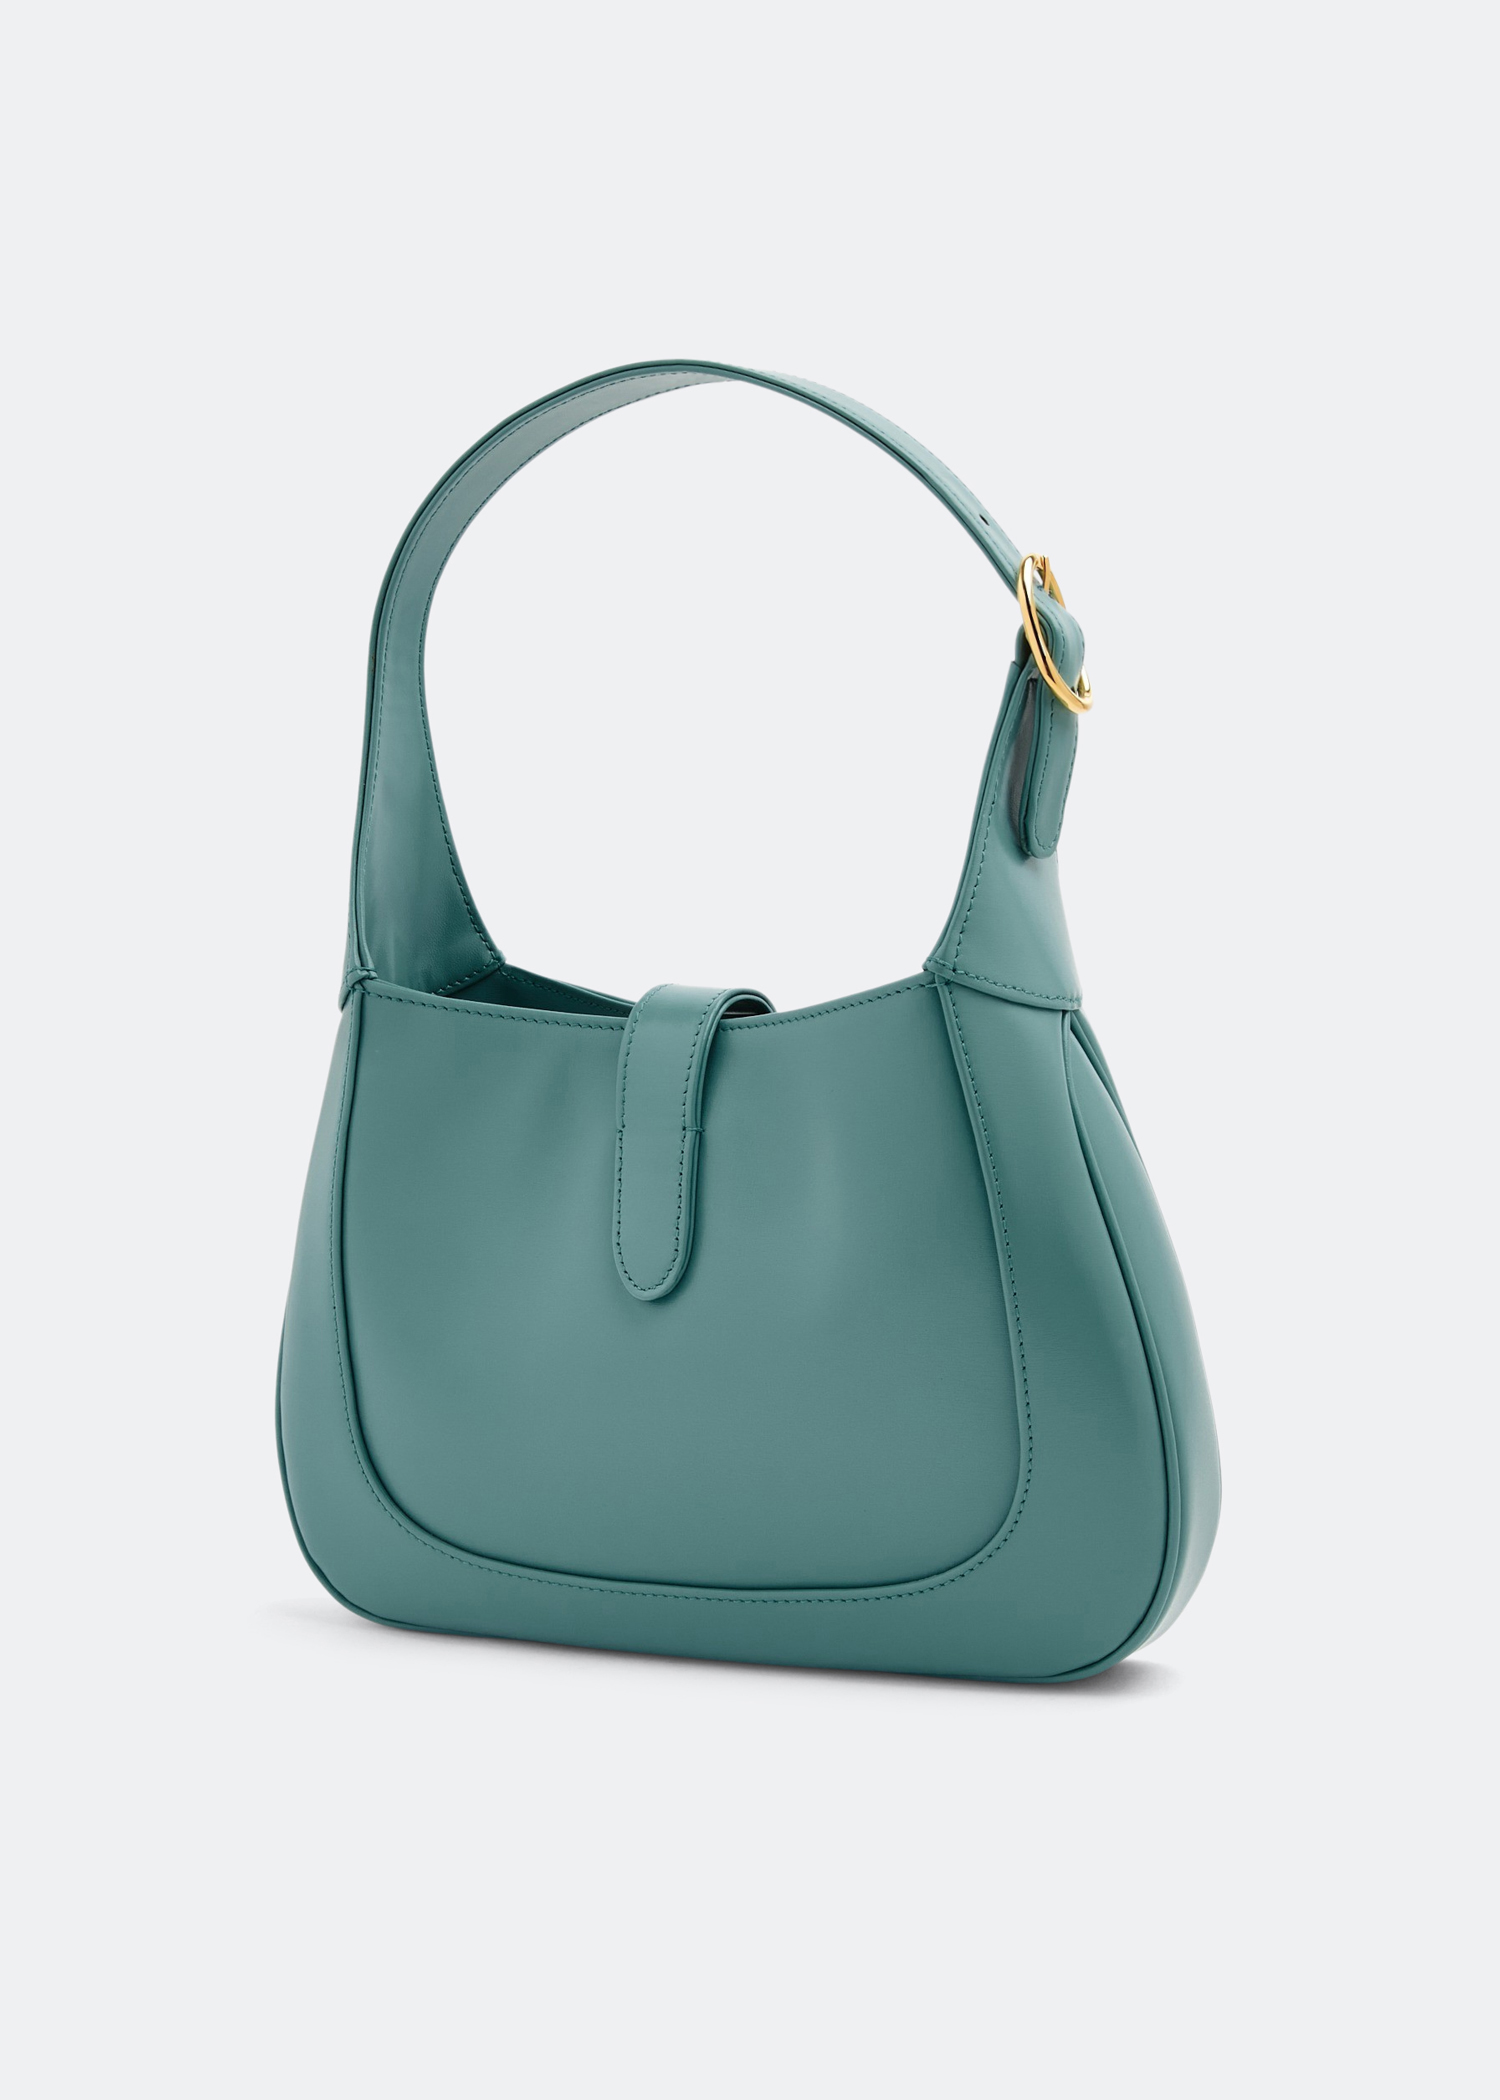 Jackie 1961 Small Leather Shoulder Bag in Green - Gucci